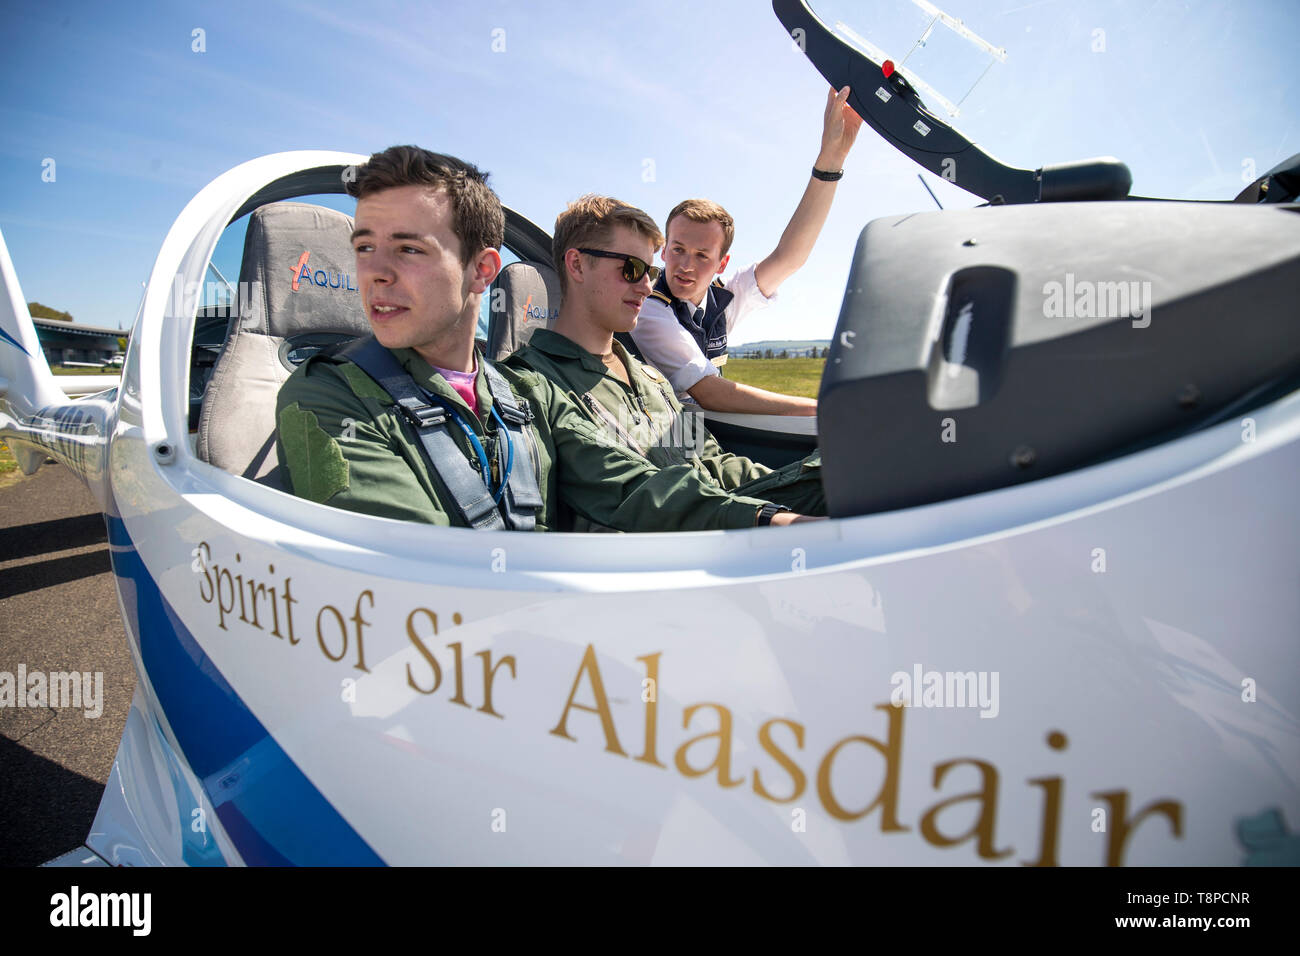 (left to right) RAF cadets Ben Hunter and Joel Pilkington, with instructor Gareth Hutchison, check over a quartet of aircraft commemorating one of the most poignant tales of wartime Britain which they'll be learning to fly in at Tayside Aviation, Dundee. Stock Photo